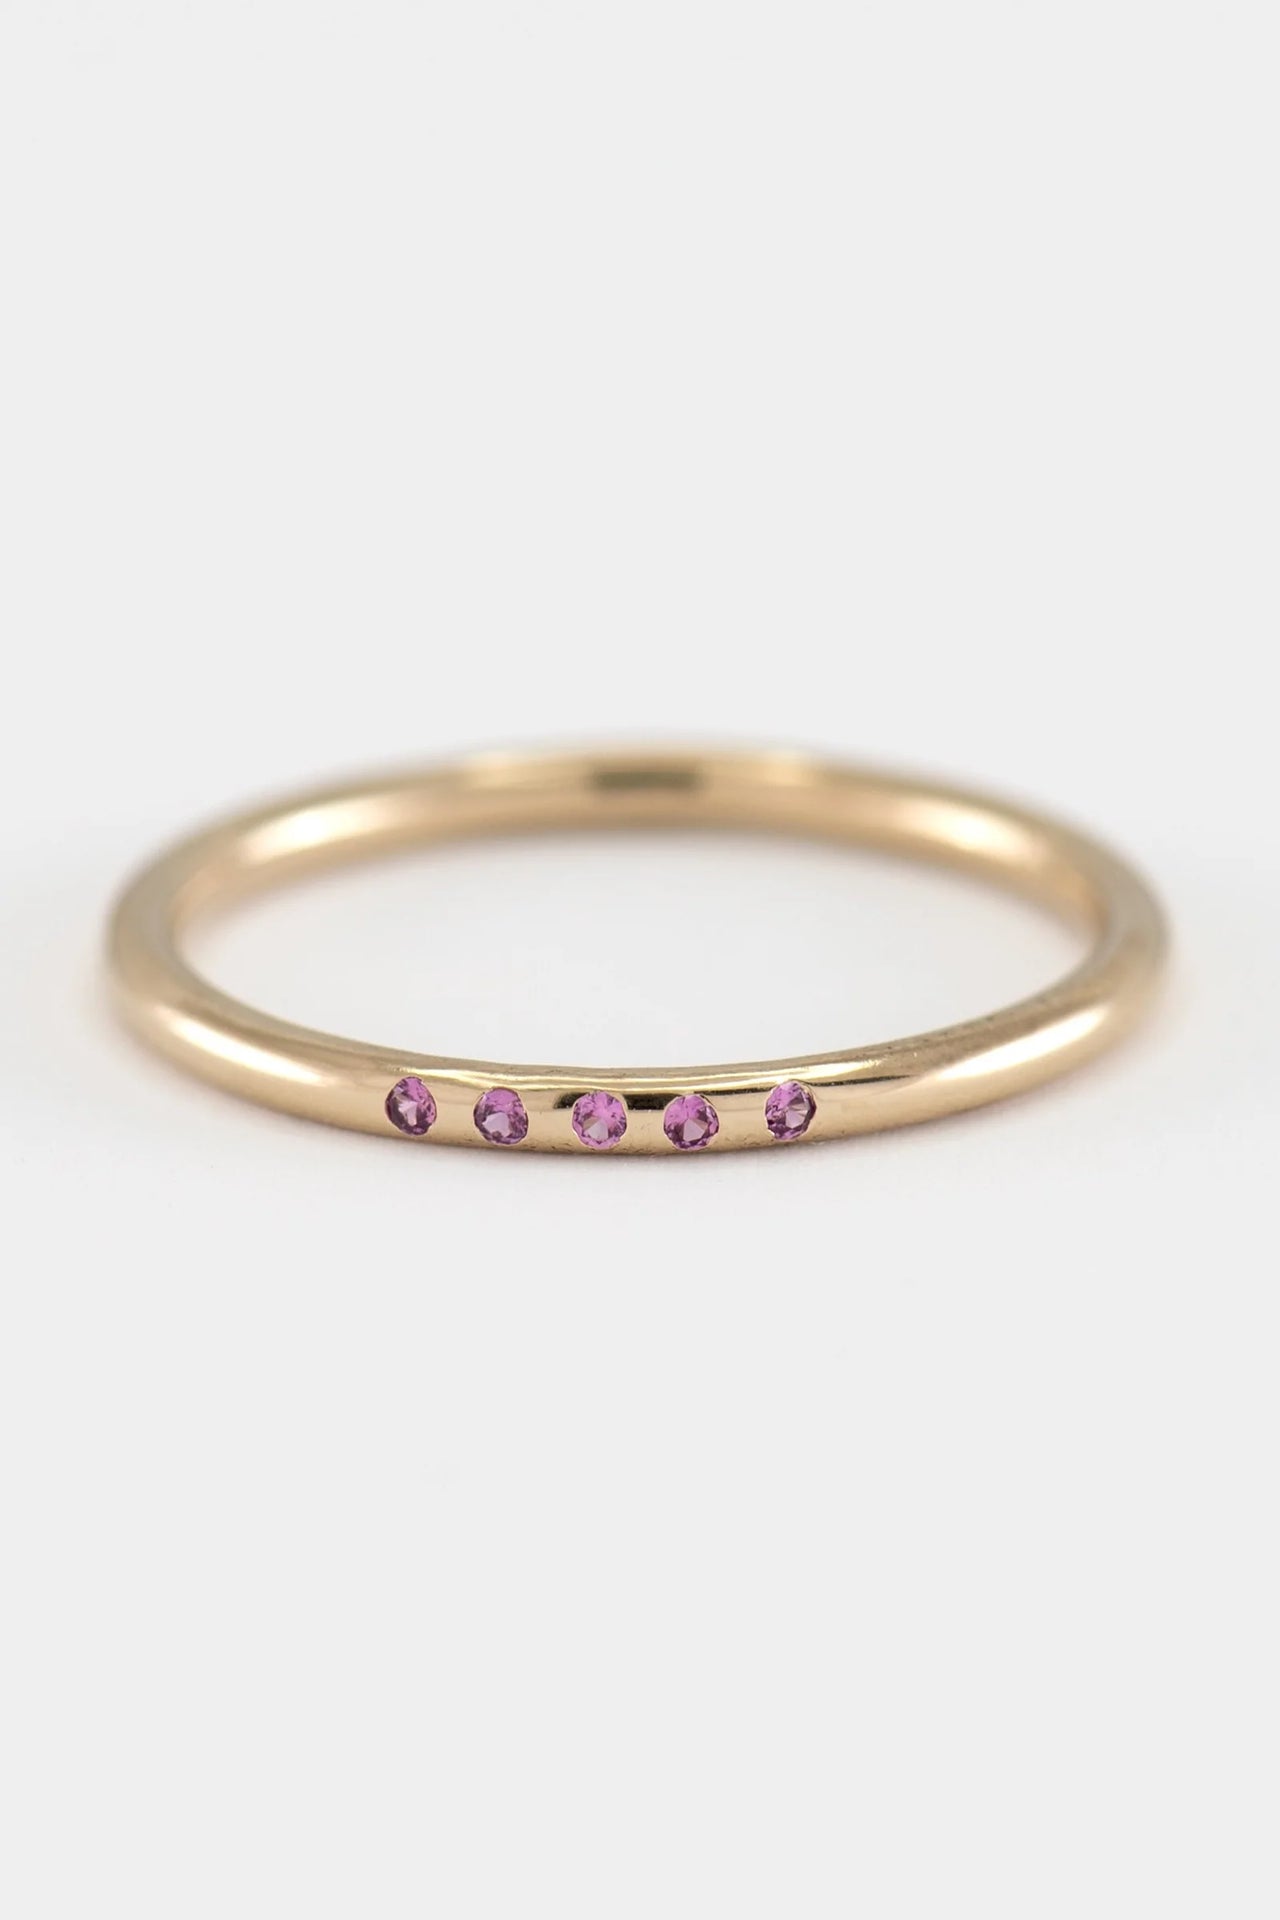 Ariana Pink Sapphire Ring 14k Gold, Rings by PK Jewlery | LIT Boutique